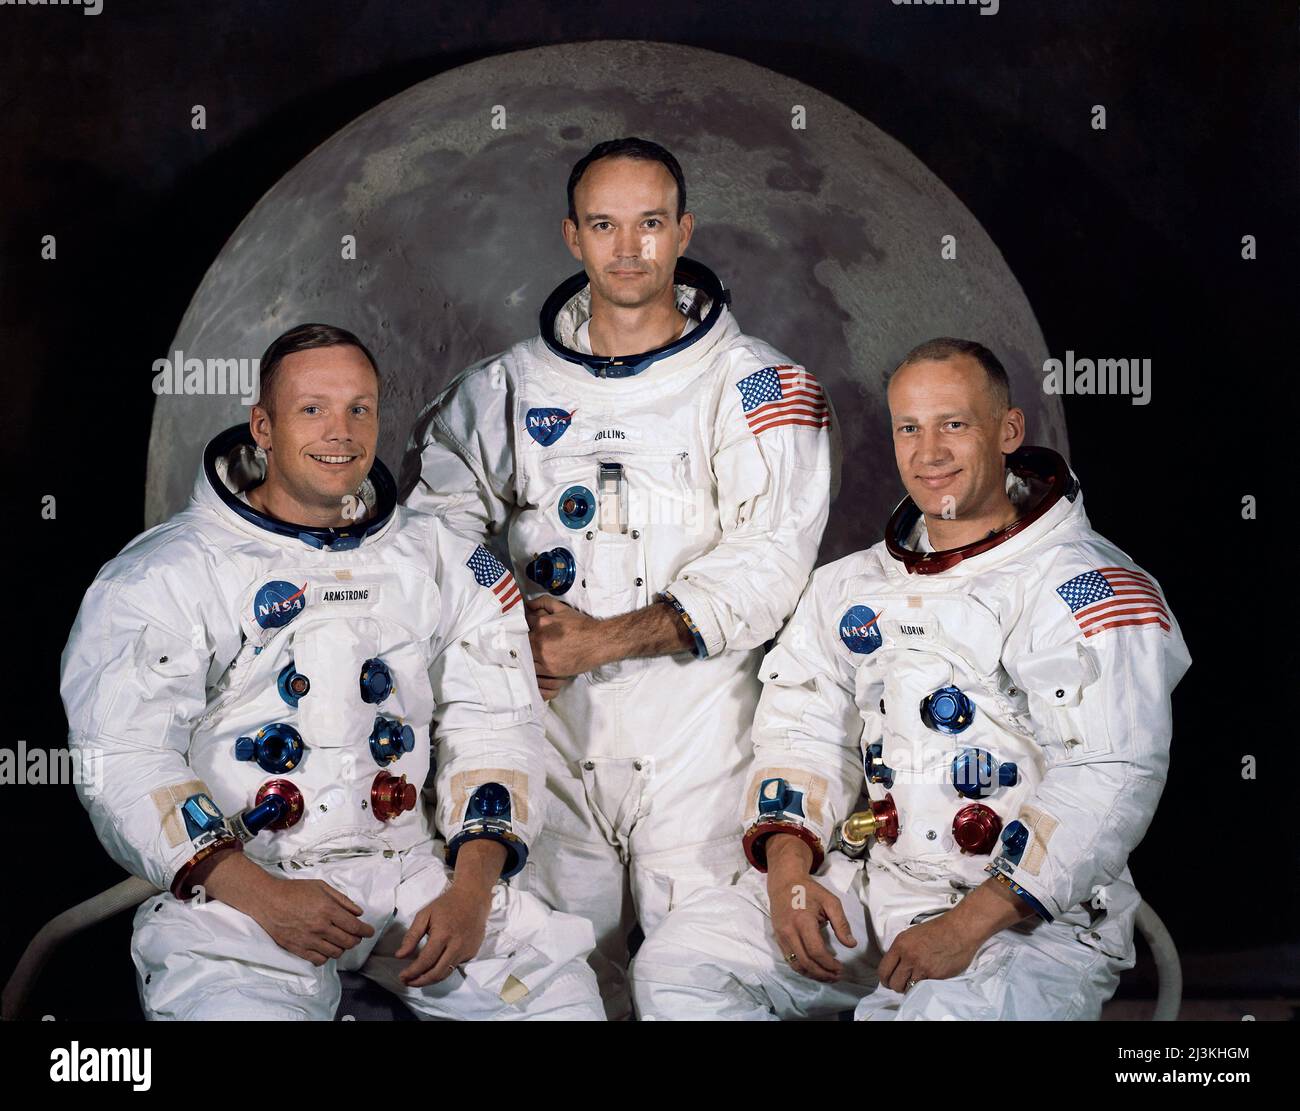 The Apollo 11 lunar landing mission crew, pictured from left to right, Neil Armstrong, Michael Collins and Edwin (Buzz) Aldrin. Apollo 11 was the first mission to land on the moon and Neil Armstrong and Buzz Aldrin were the first men to walk on the moon. Stock Photo